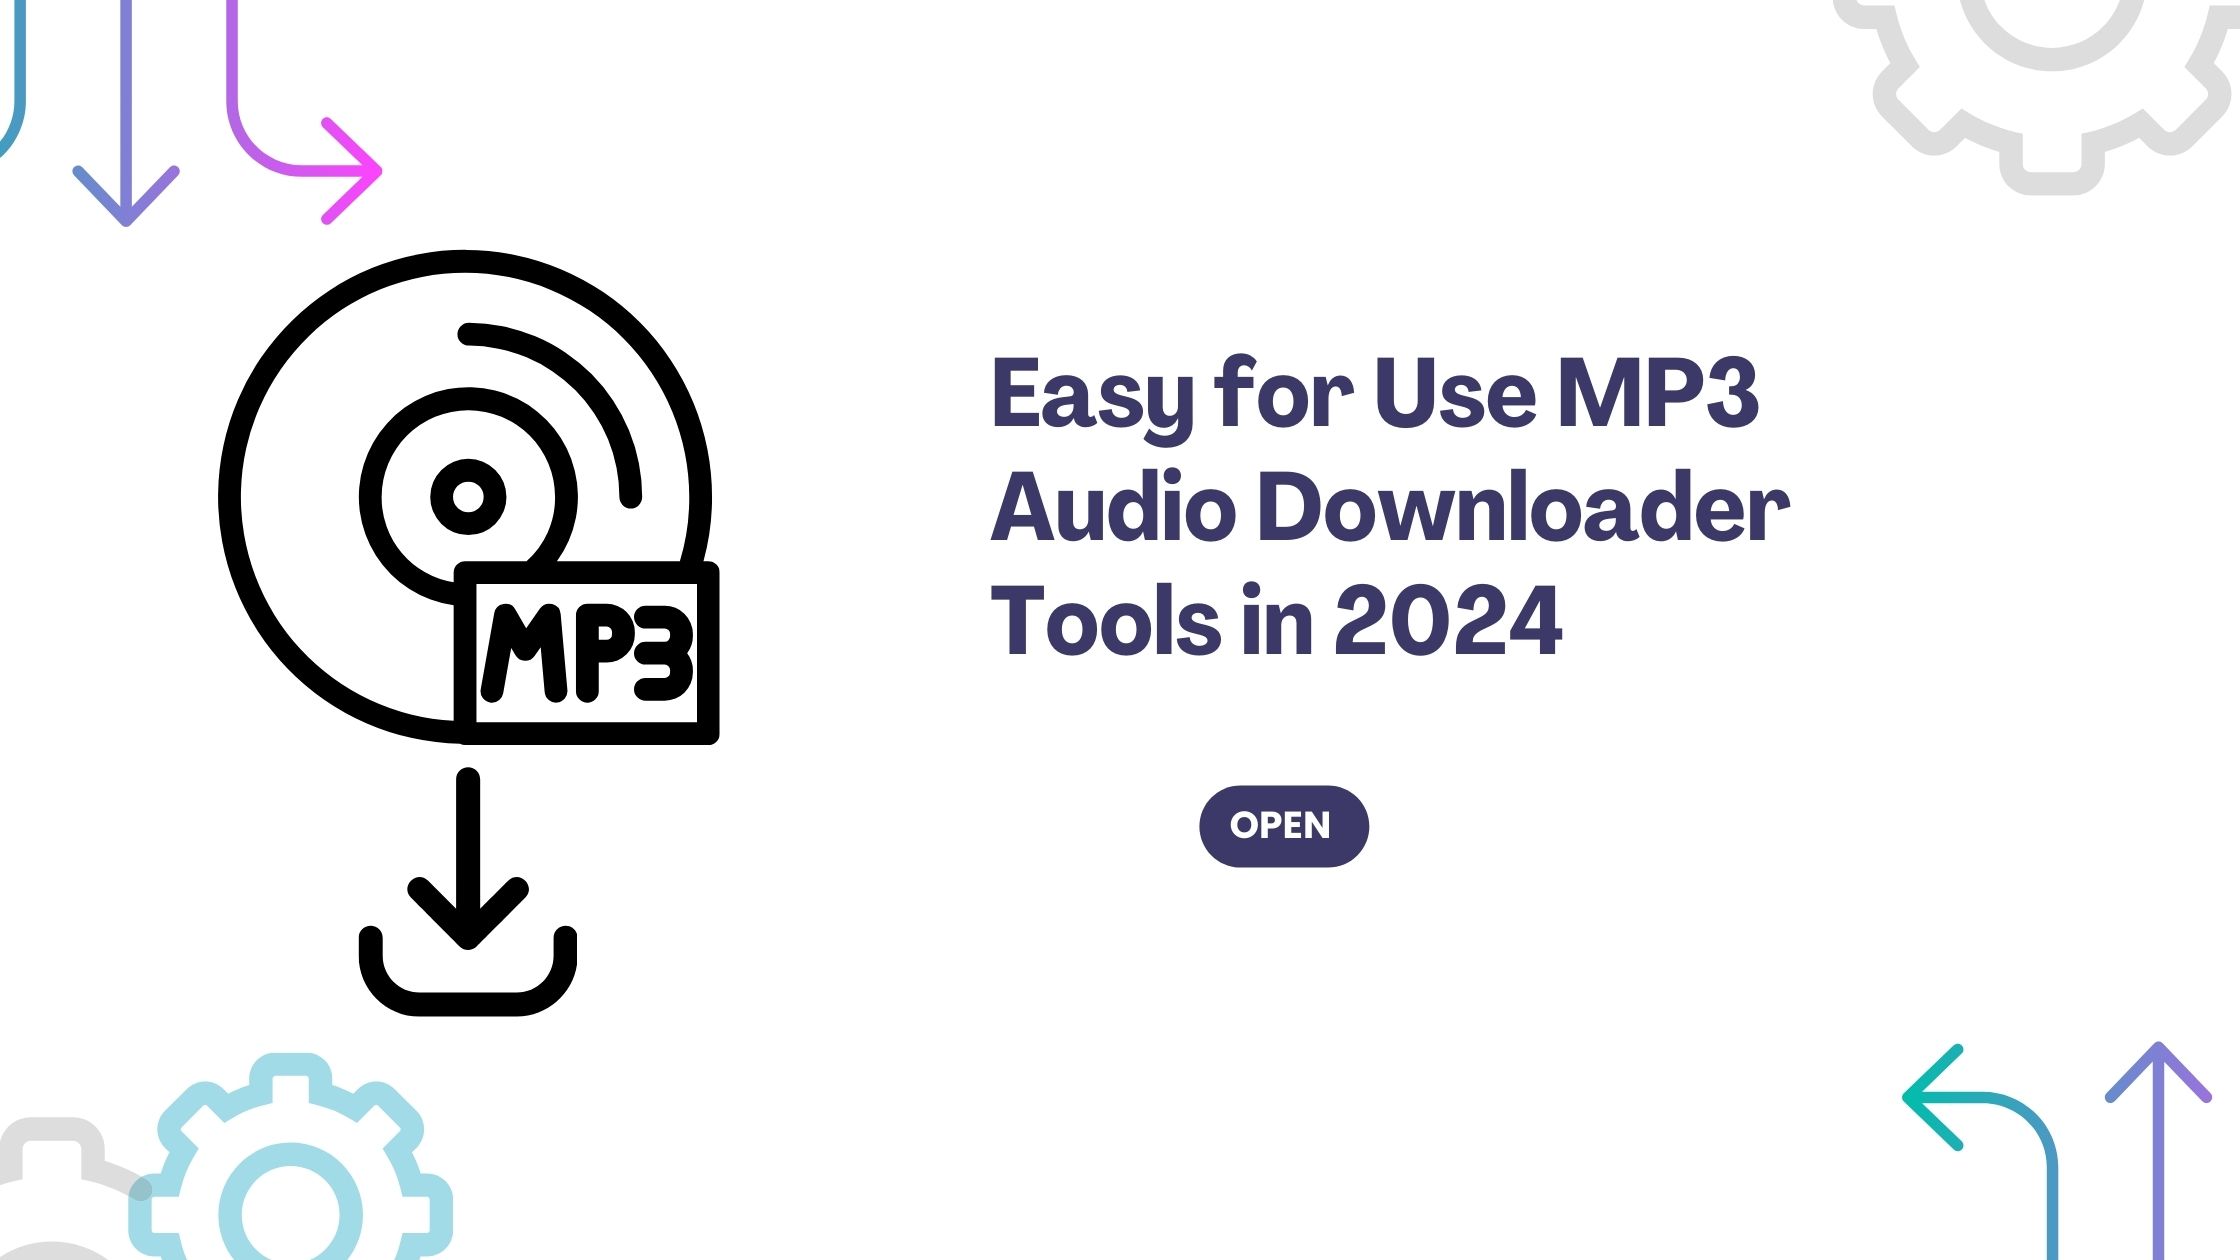 Easy for Use MP3 Audio Downloader Tools in 2024